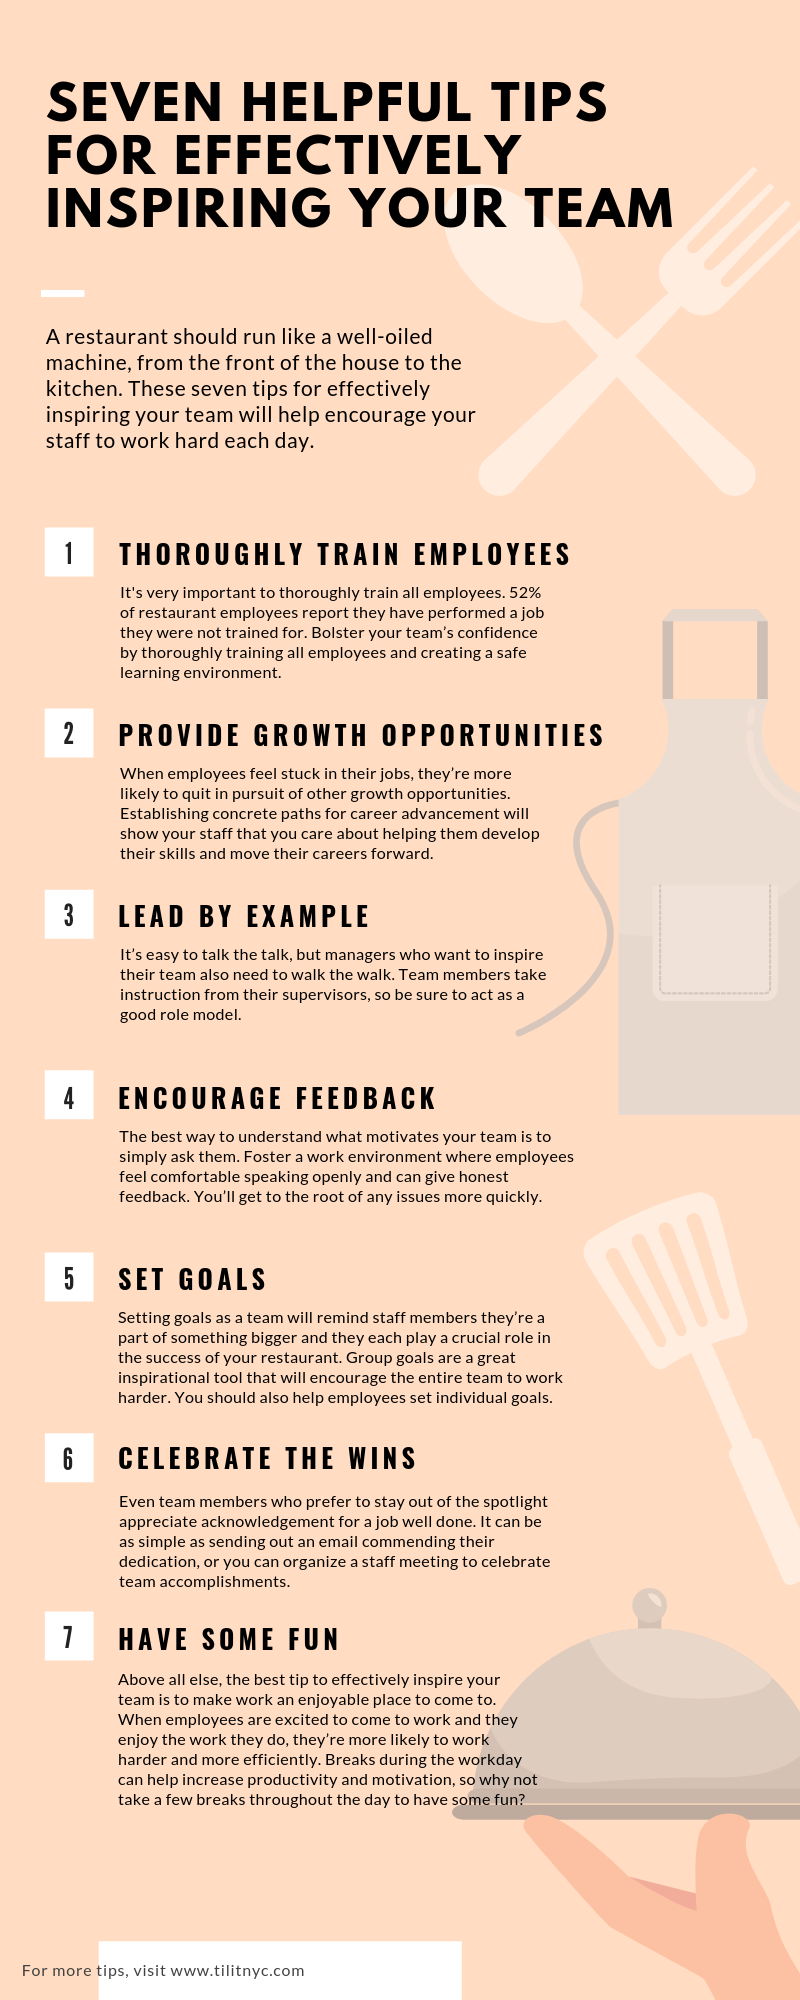 Seven Helpful Tips for Effectively Inspiring Your Team infographic